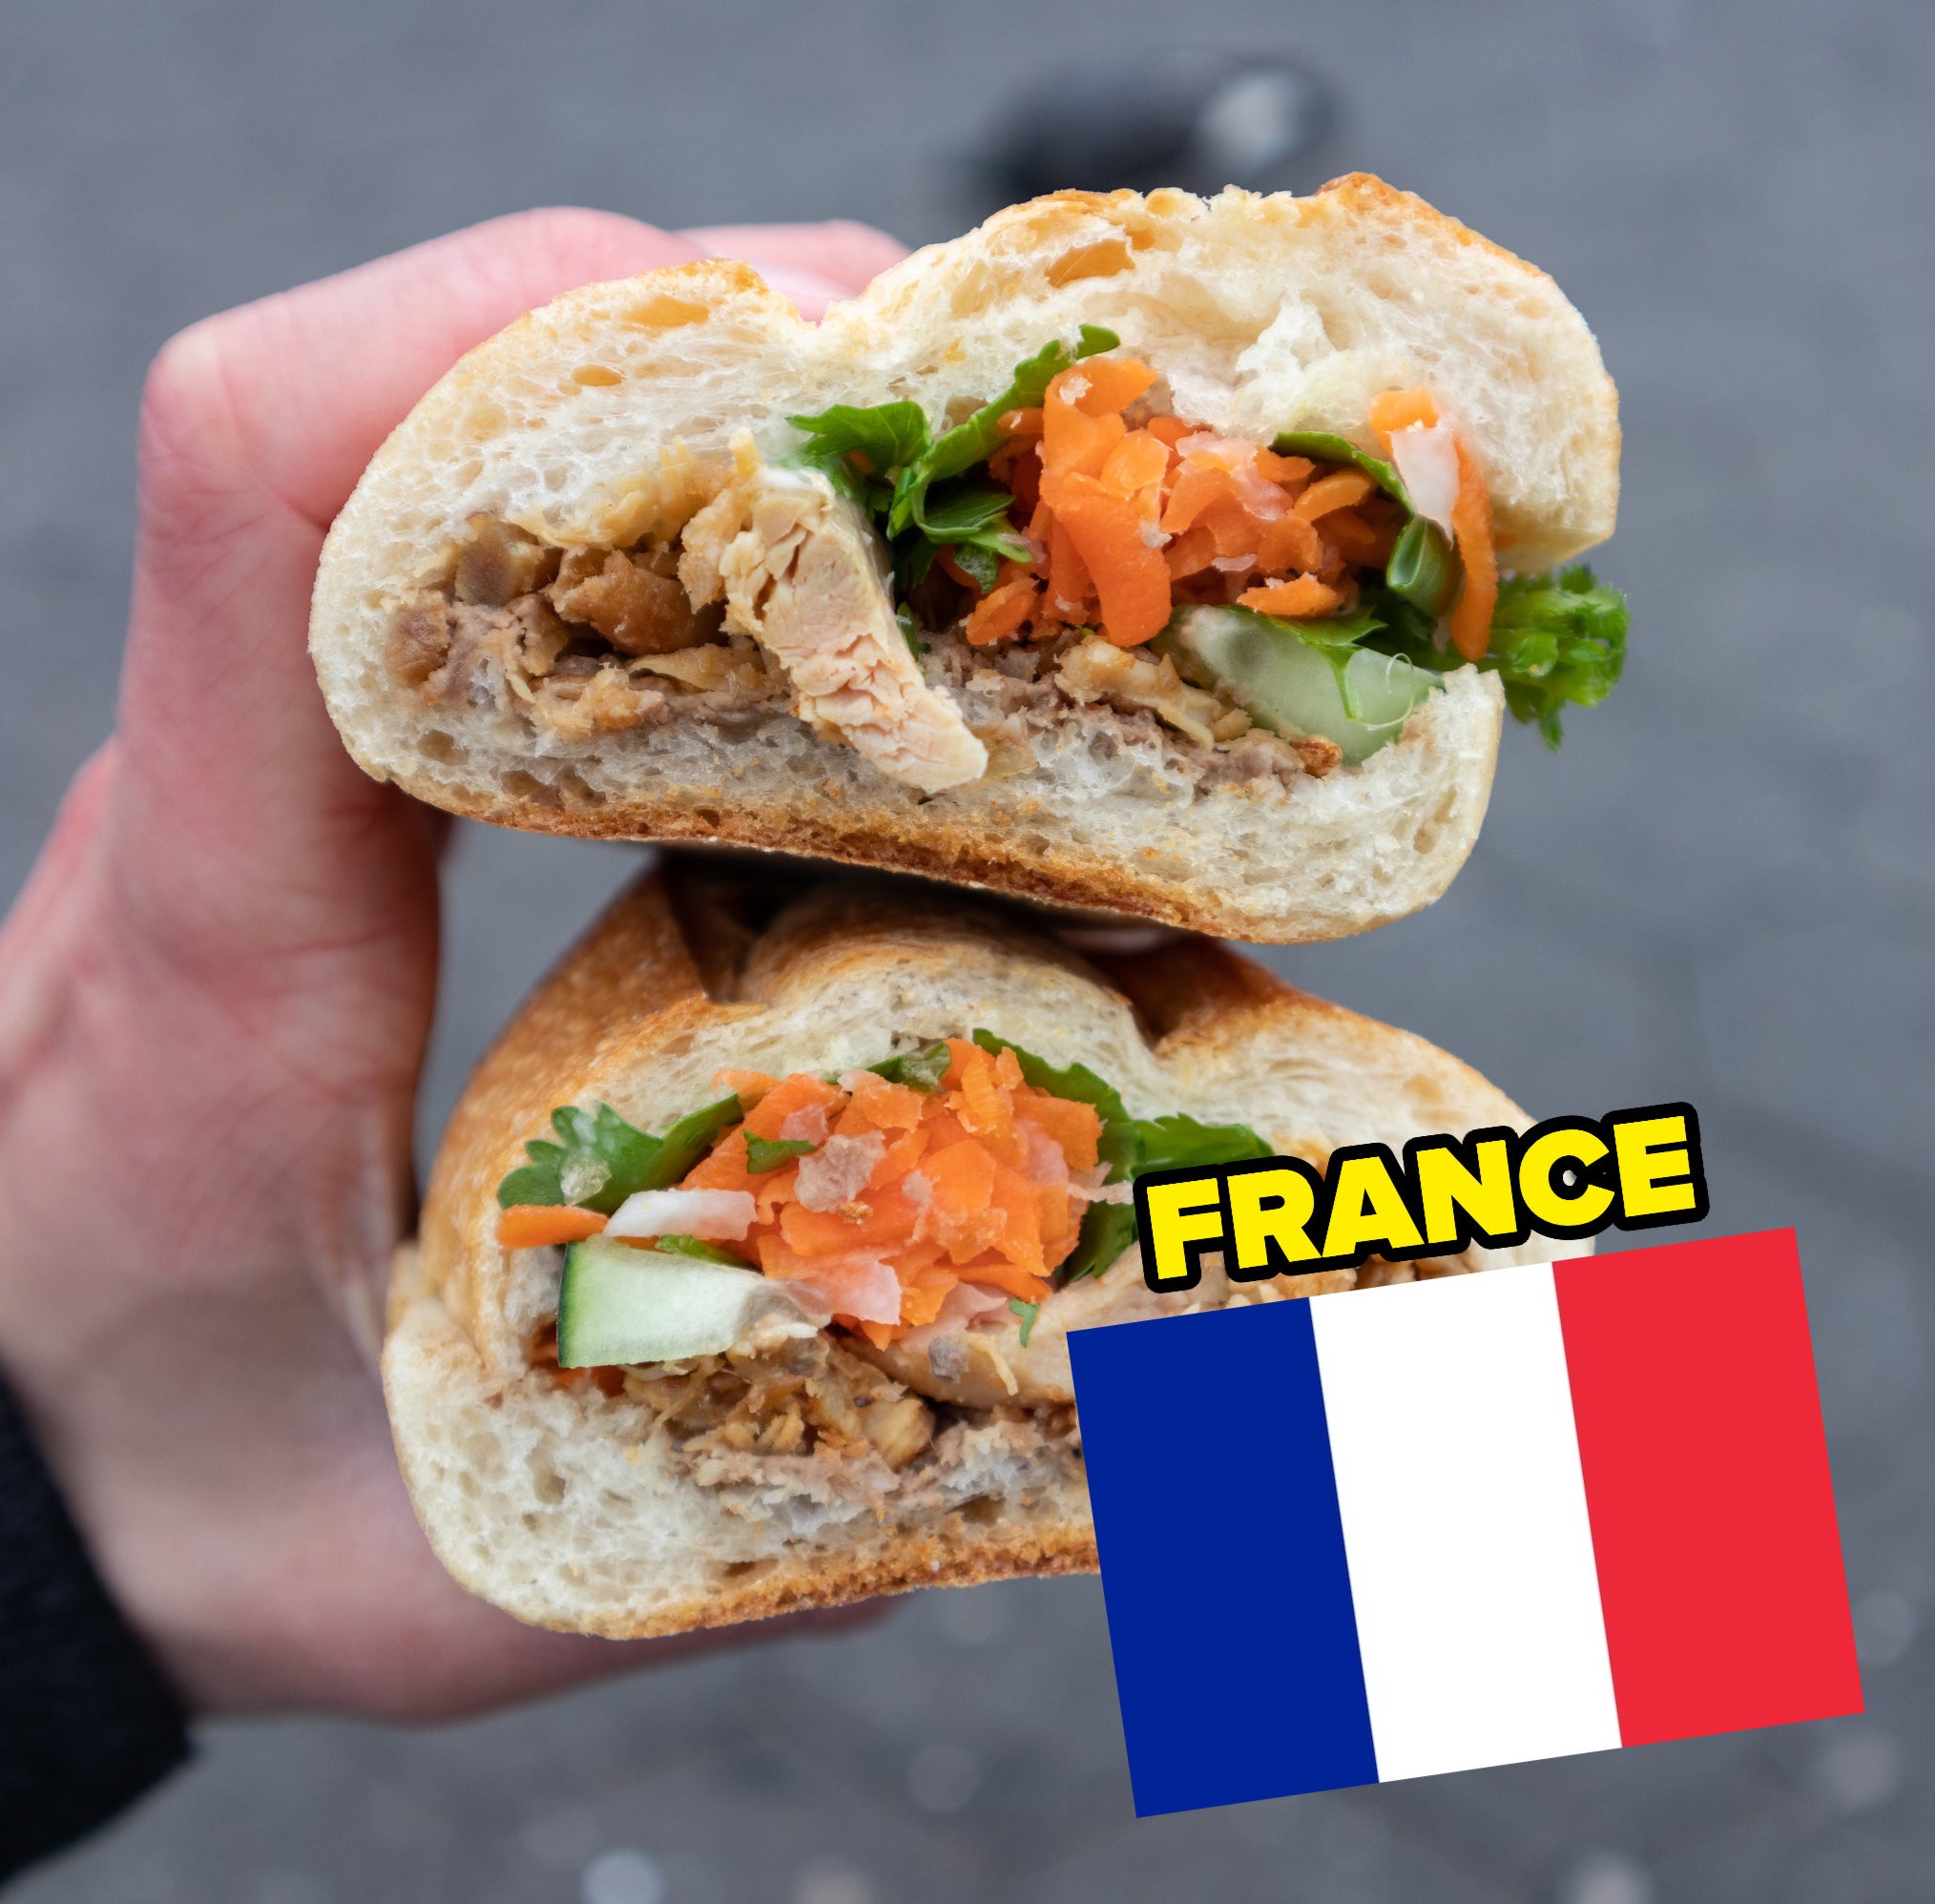 a banh mi sandwich with a French flag image